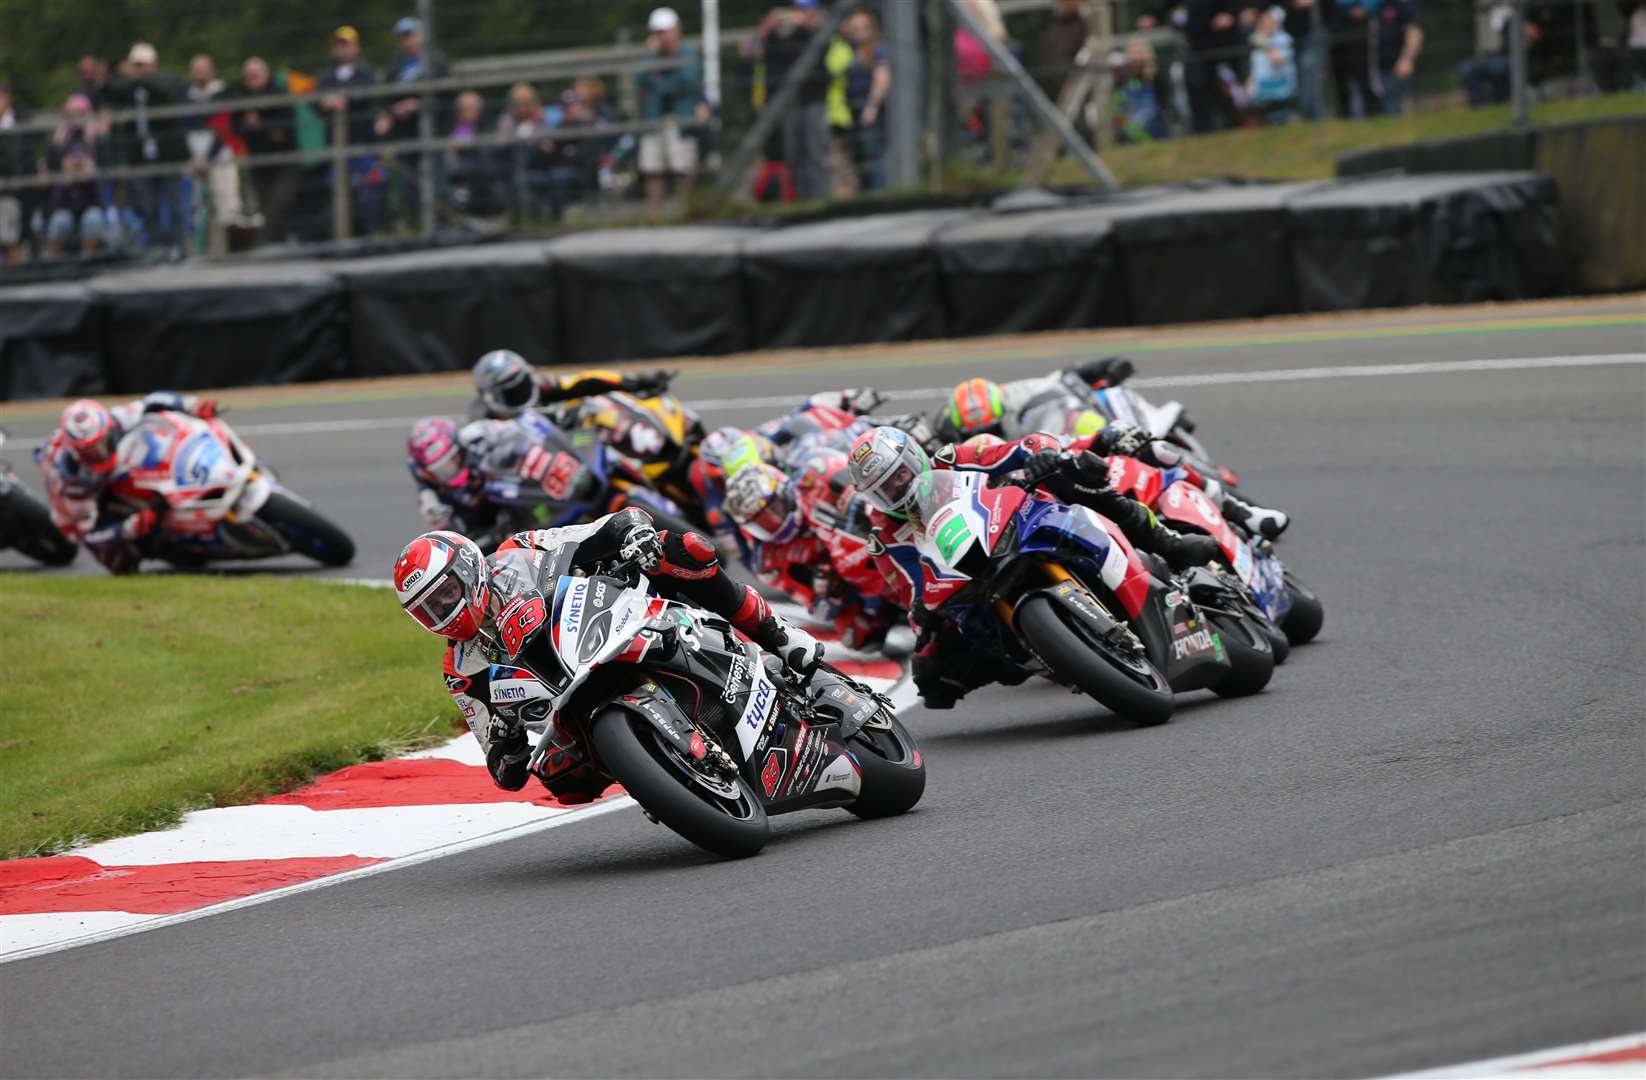 The British Superbike Championship draws thousands of fans to Brands Hatch every season. Picture: Double Red